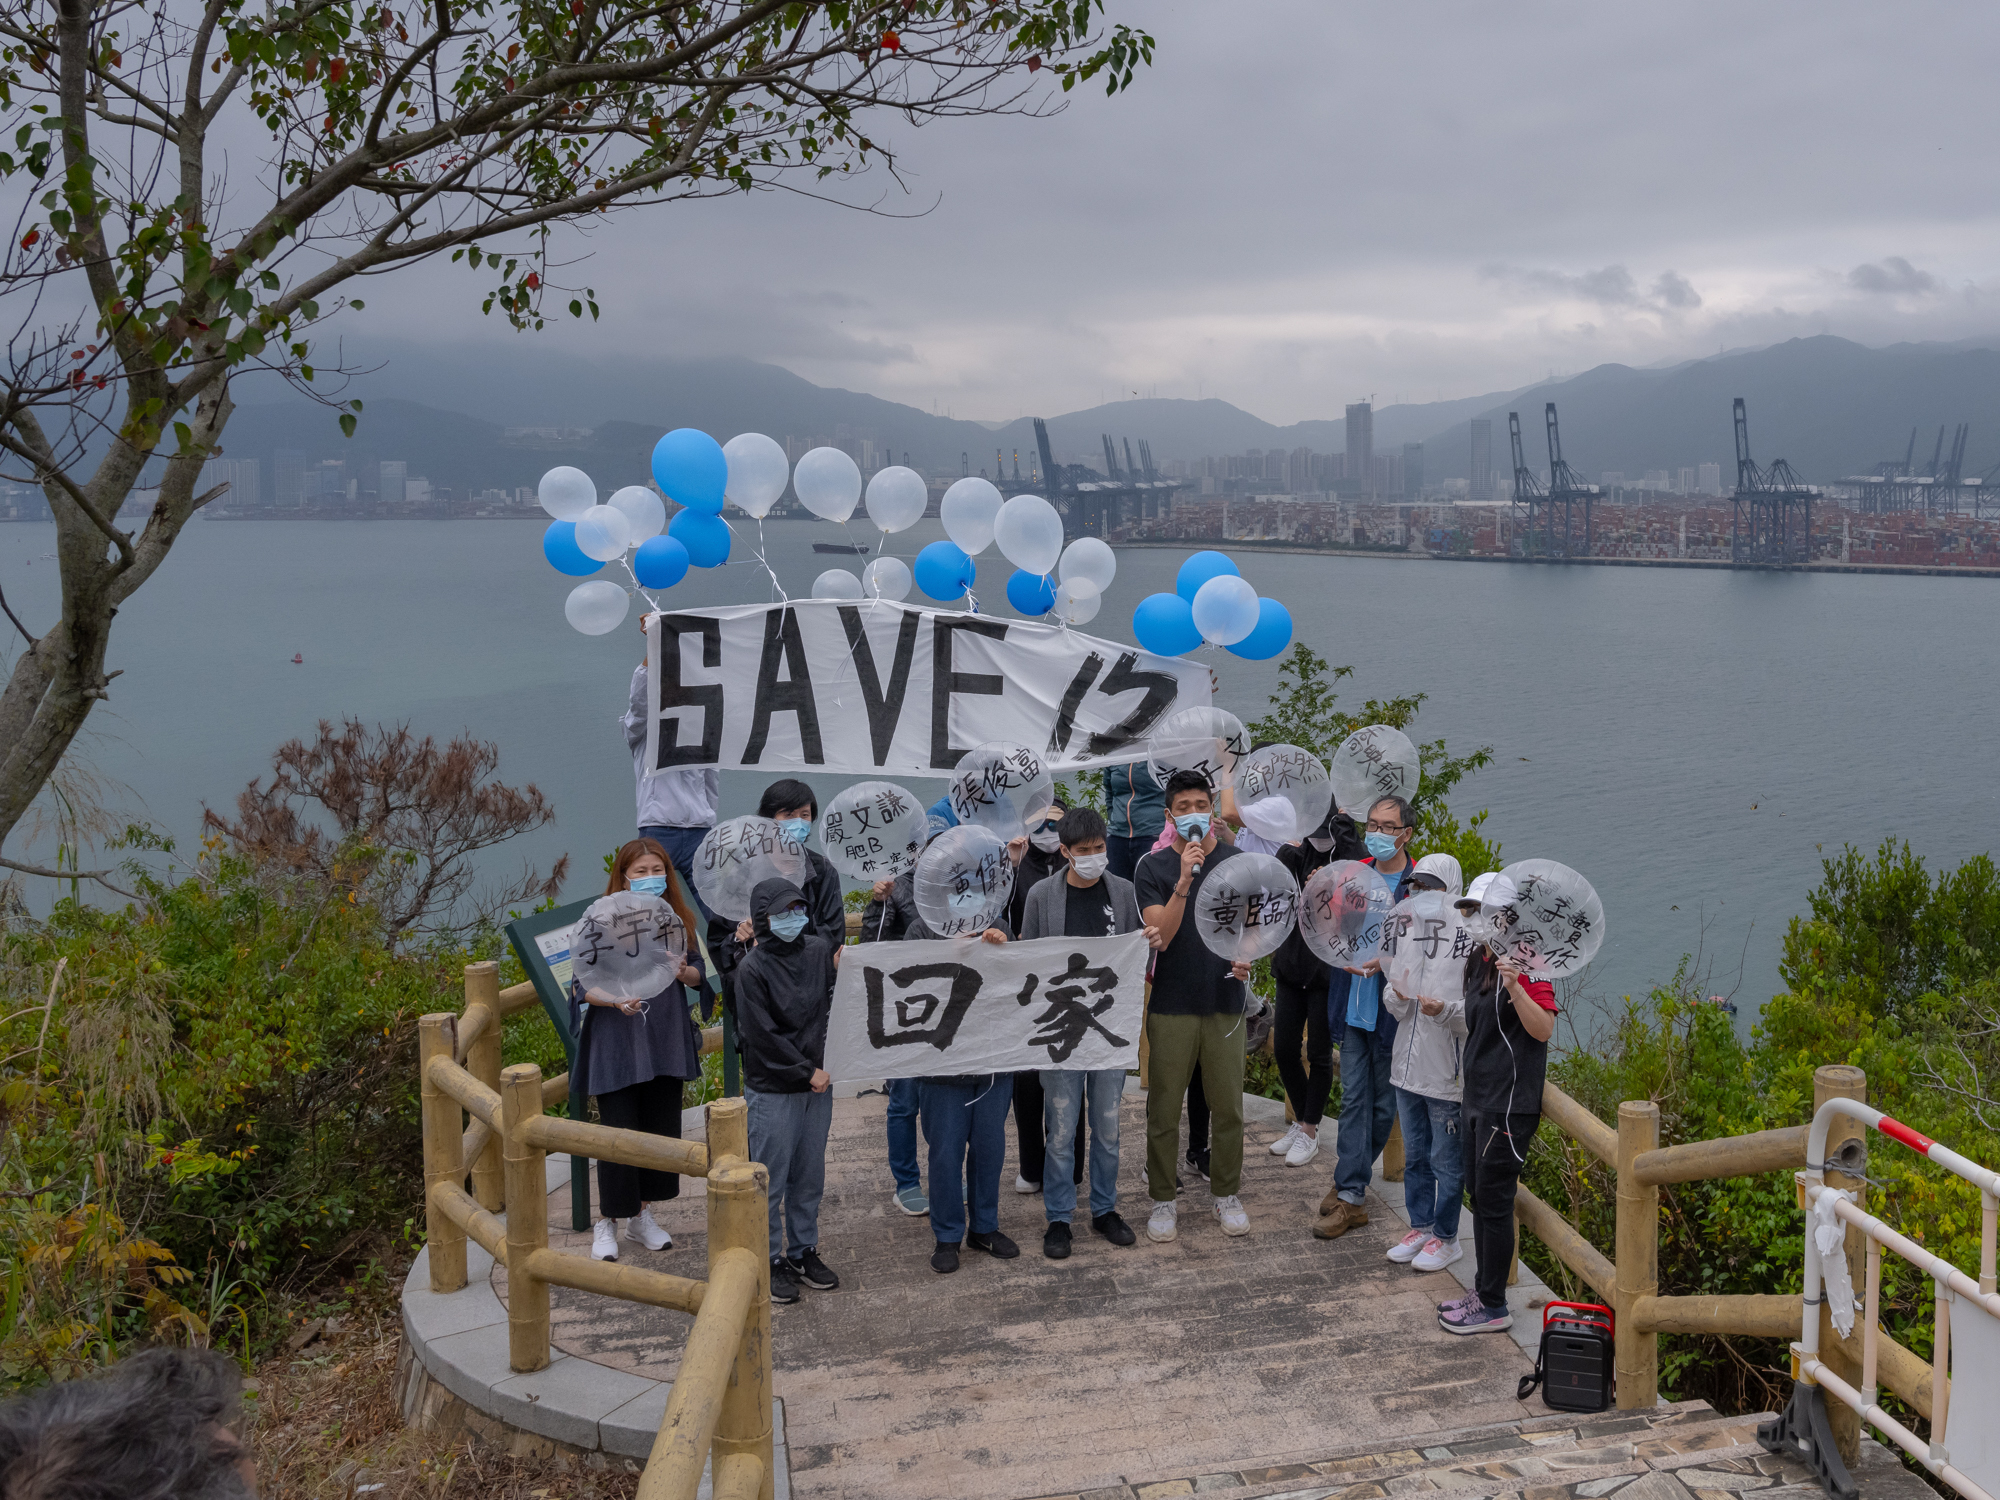 In August 2020, the Coast Guard of the Chinese province of Guangdong arrested 12 Hong Kong people attempting to flee to Taiwan on a speedboat. They were sent to the Yantian Detention Center in Shenzhen. Relatives of the detained individuals, holding a banner bearing the words “Come Home,” released balloons carrying the names of the detainees in Hong Kong across the water from Shenzhen.